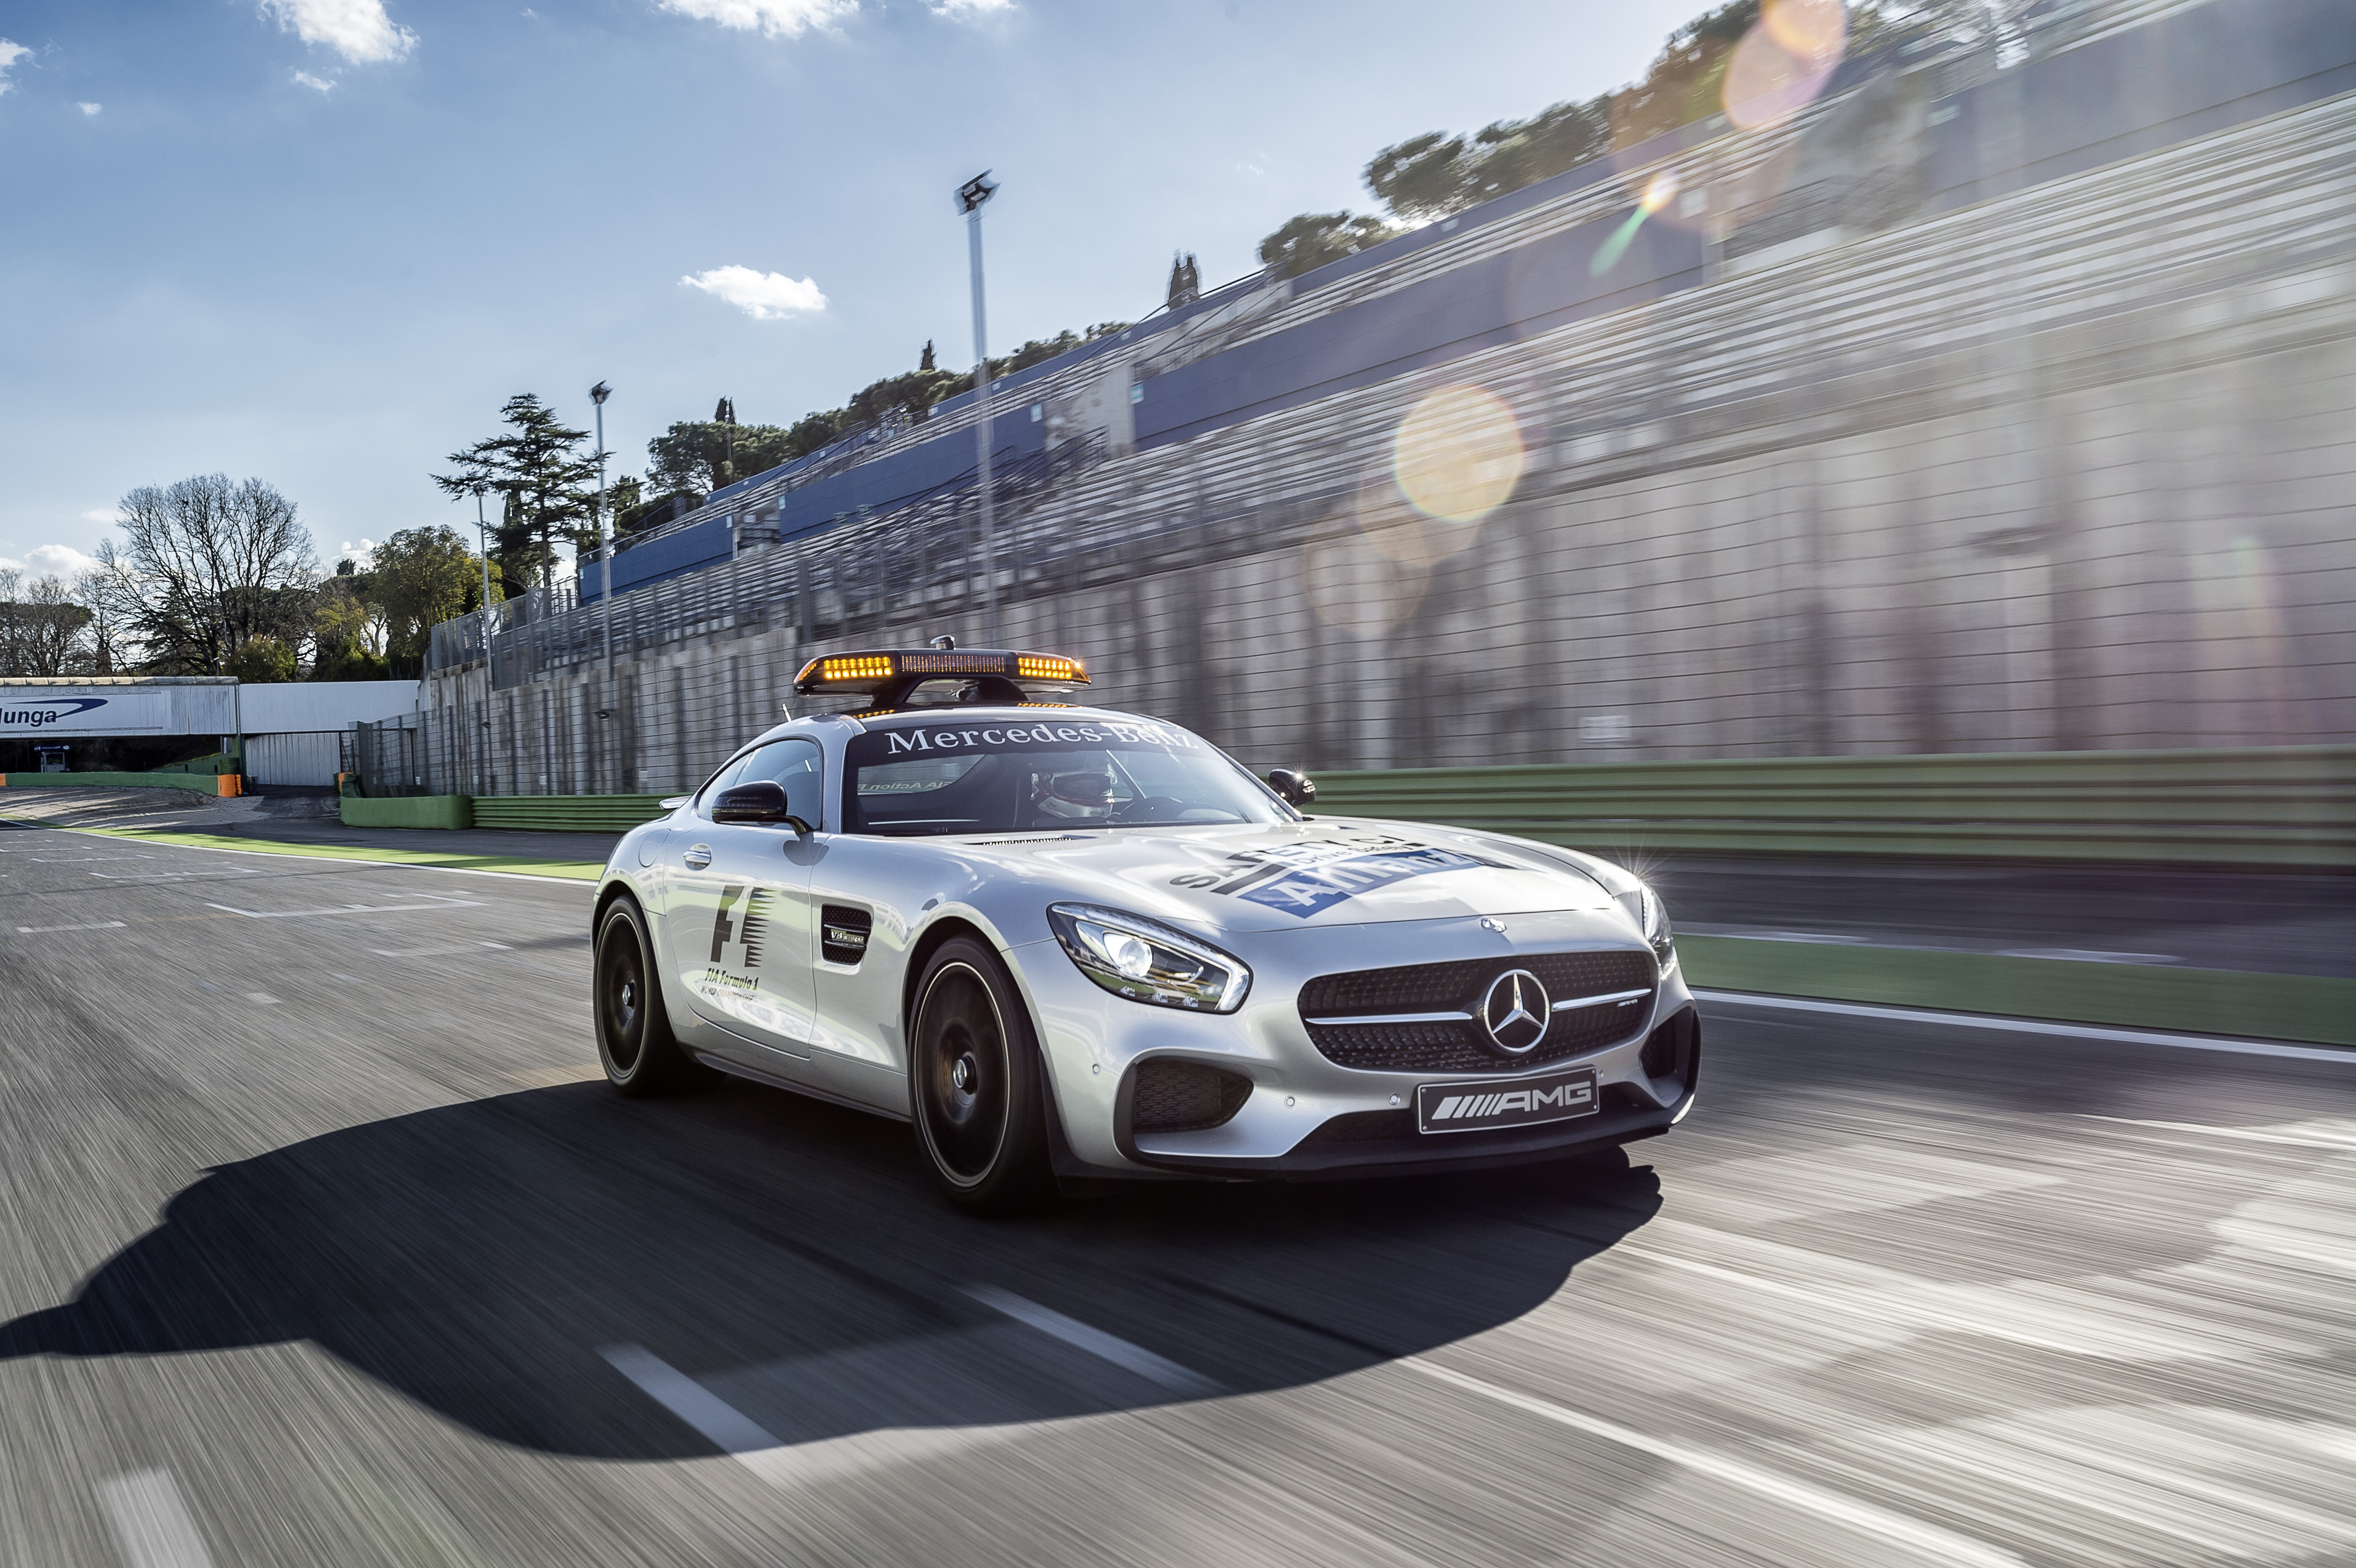 MercedesAMG GT Is Officially the 2015 Formula 1 Safety